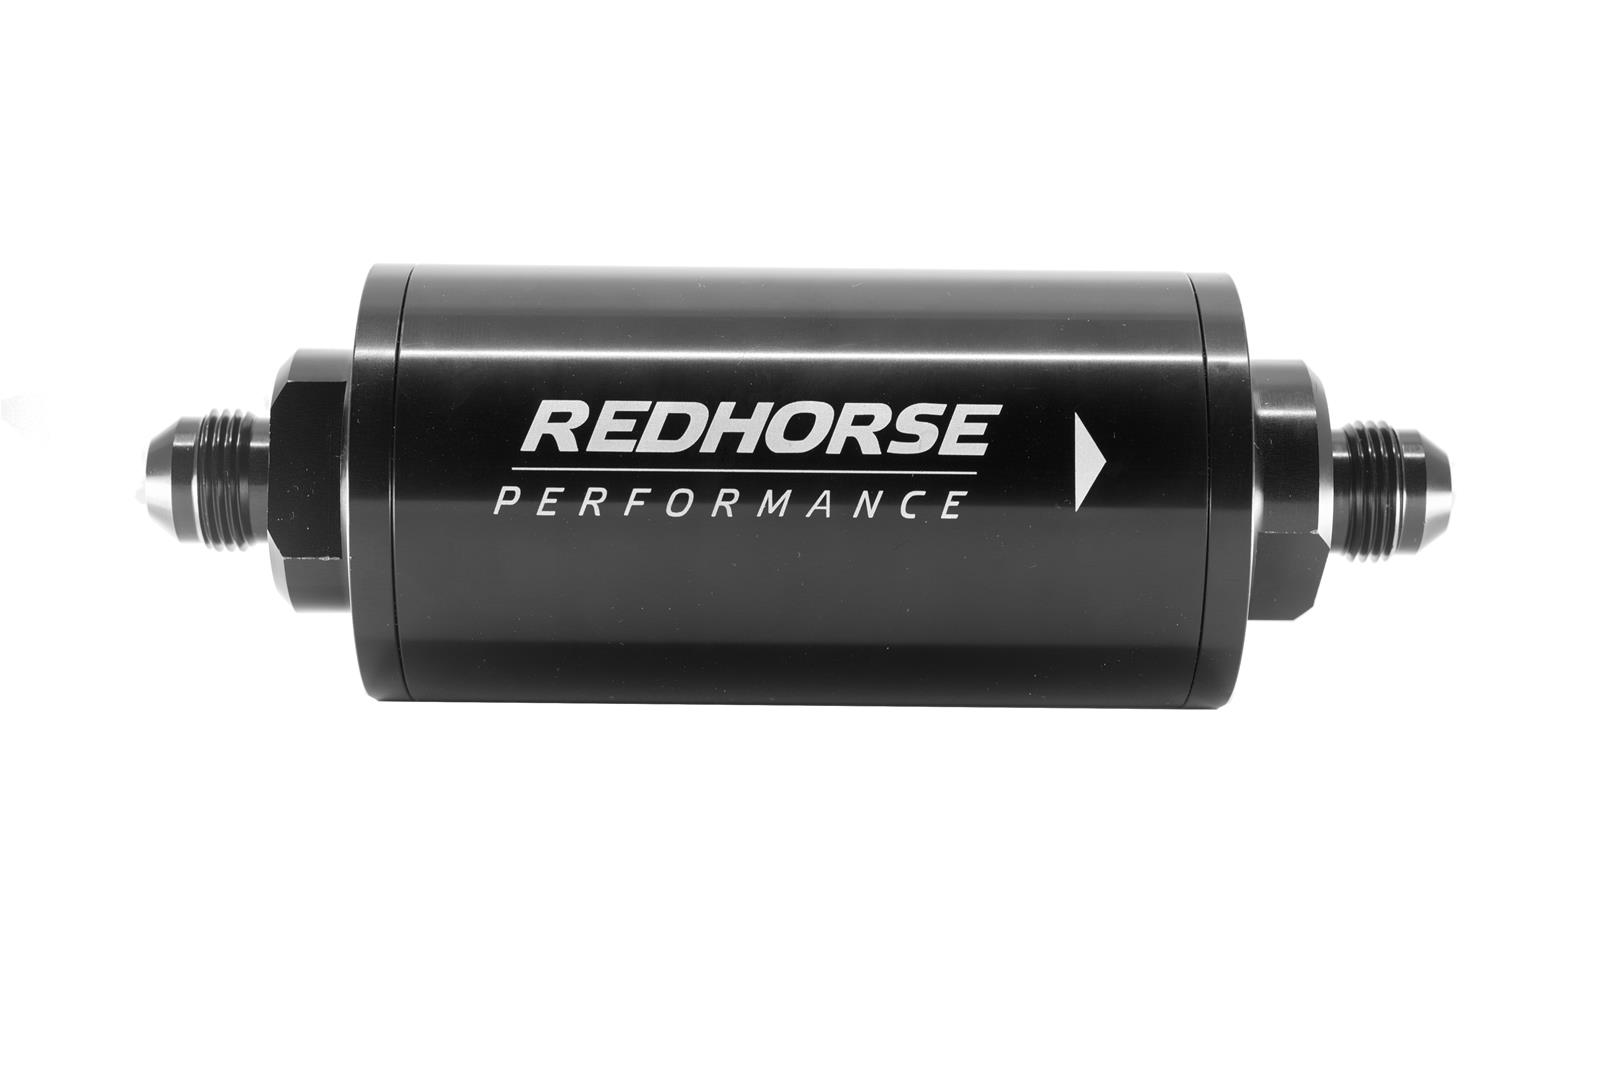 Redhorse Performance 4651-12-2-12 6in Cylindrical In-Line Race Fuel Filter w/ 12 Micron Fiberglass element - 12 AN